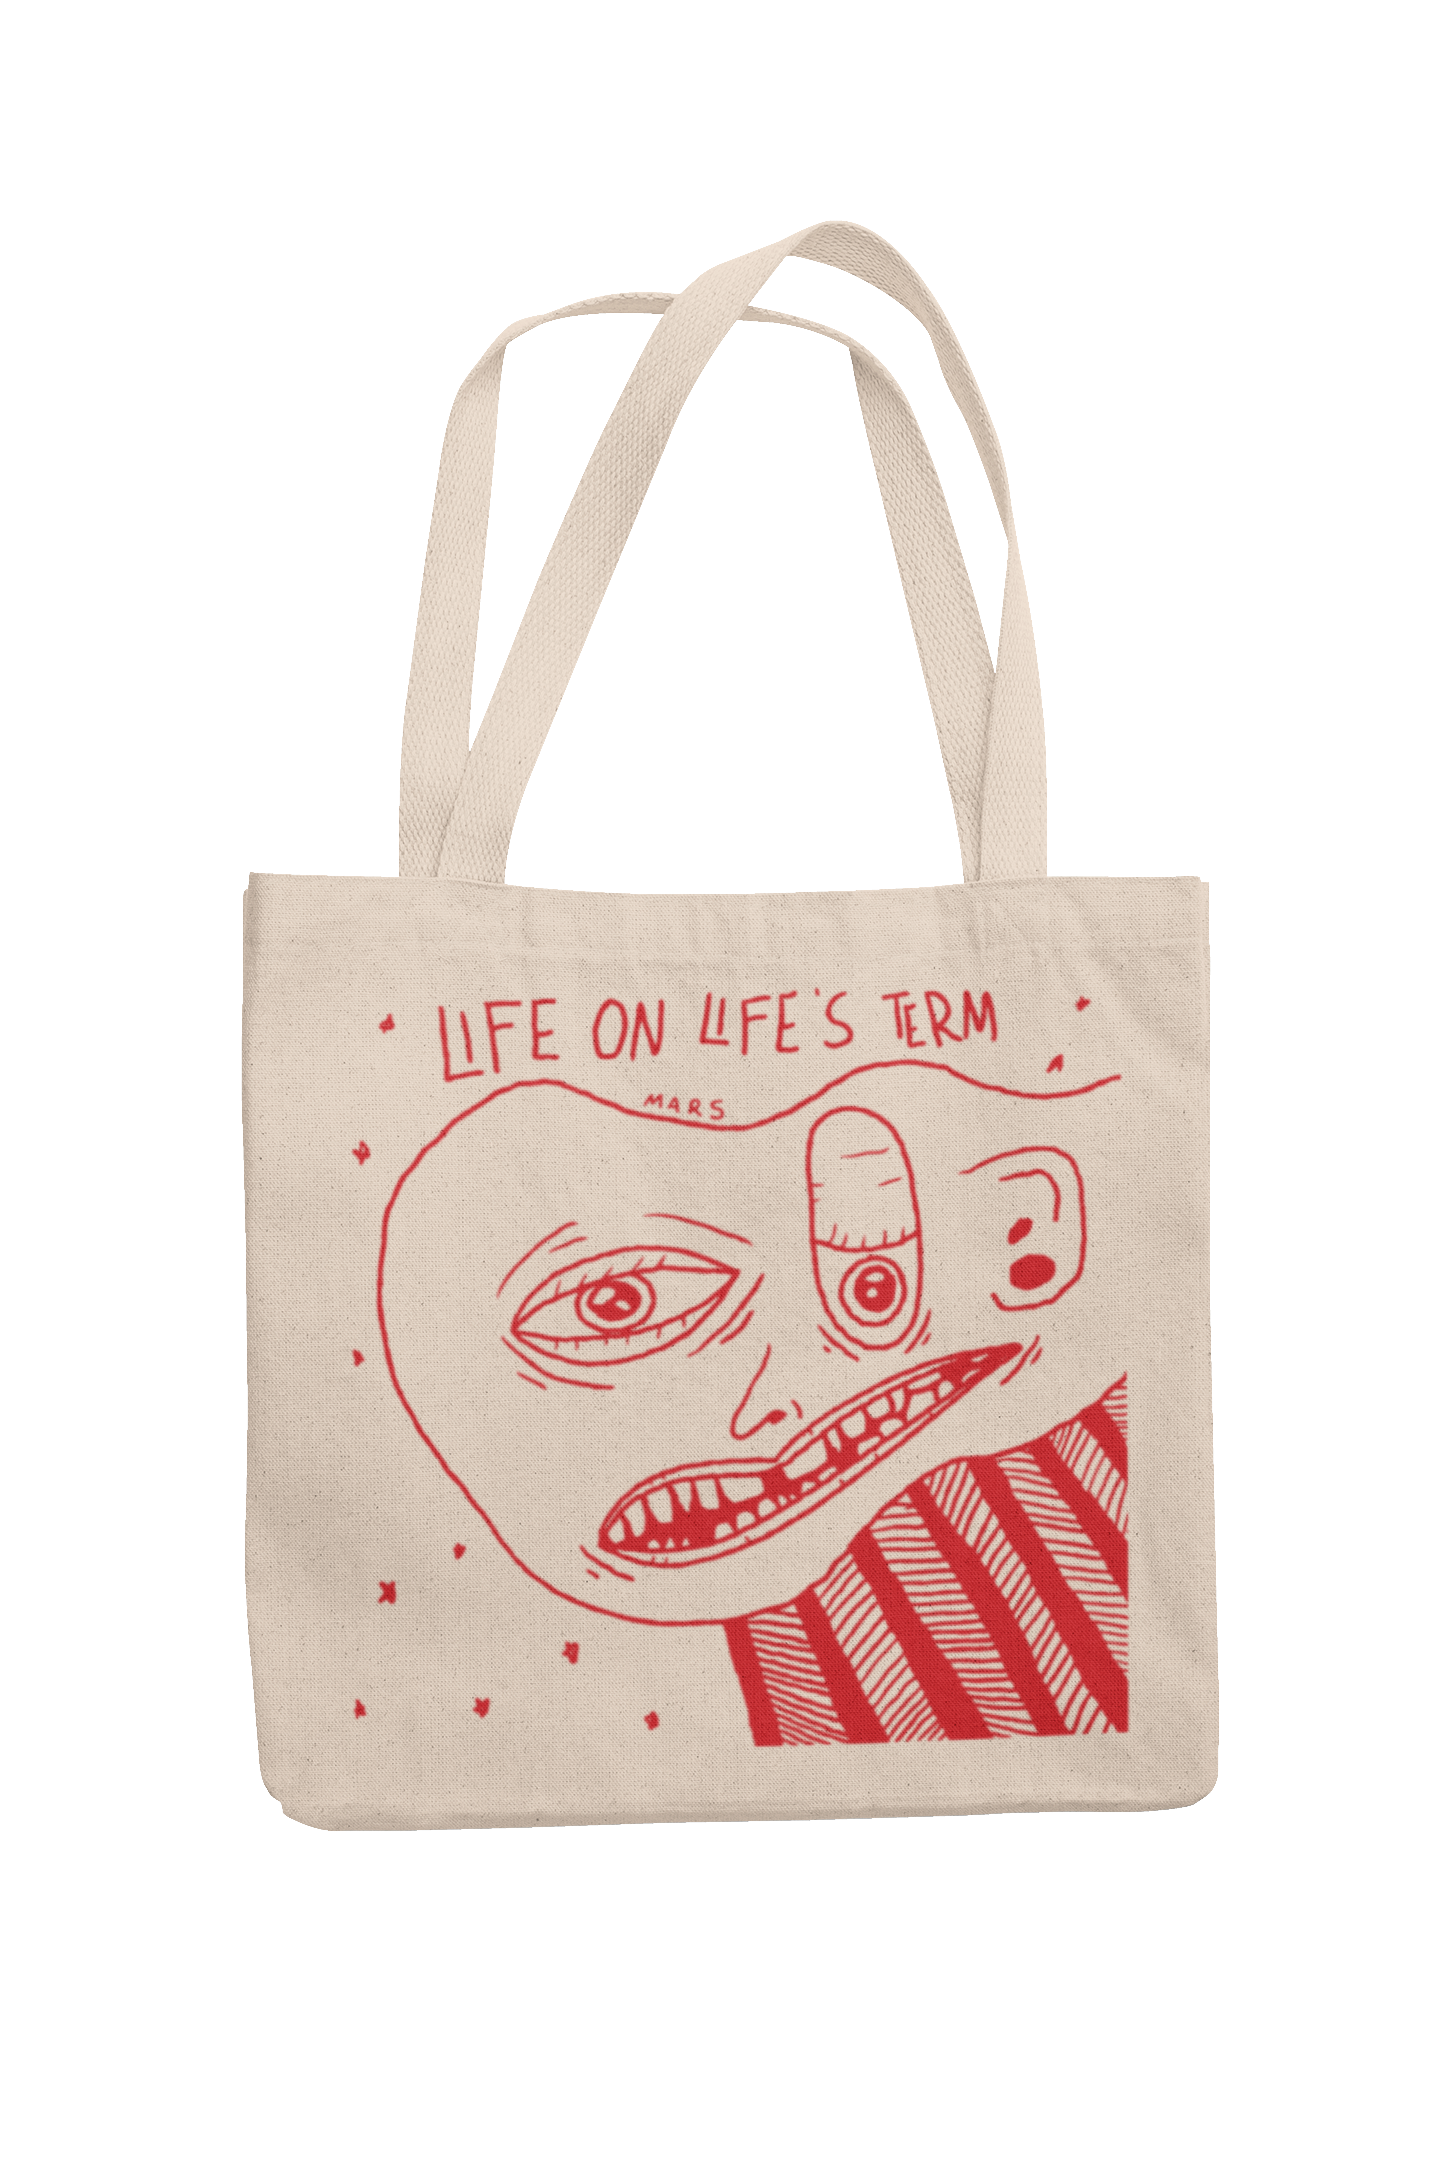 LIFE ON LIFE'S TERMS TOTE